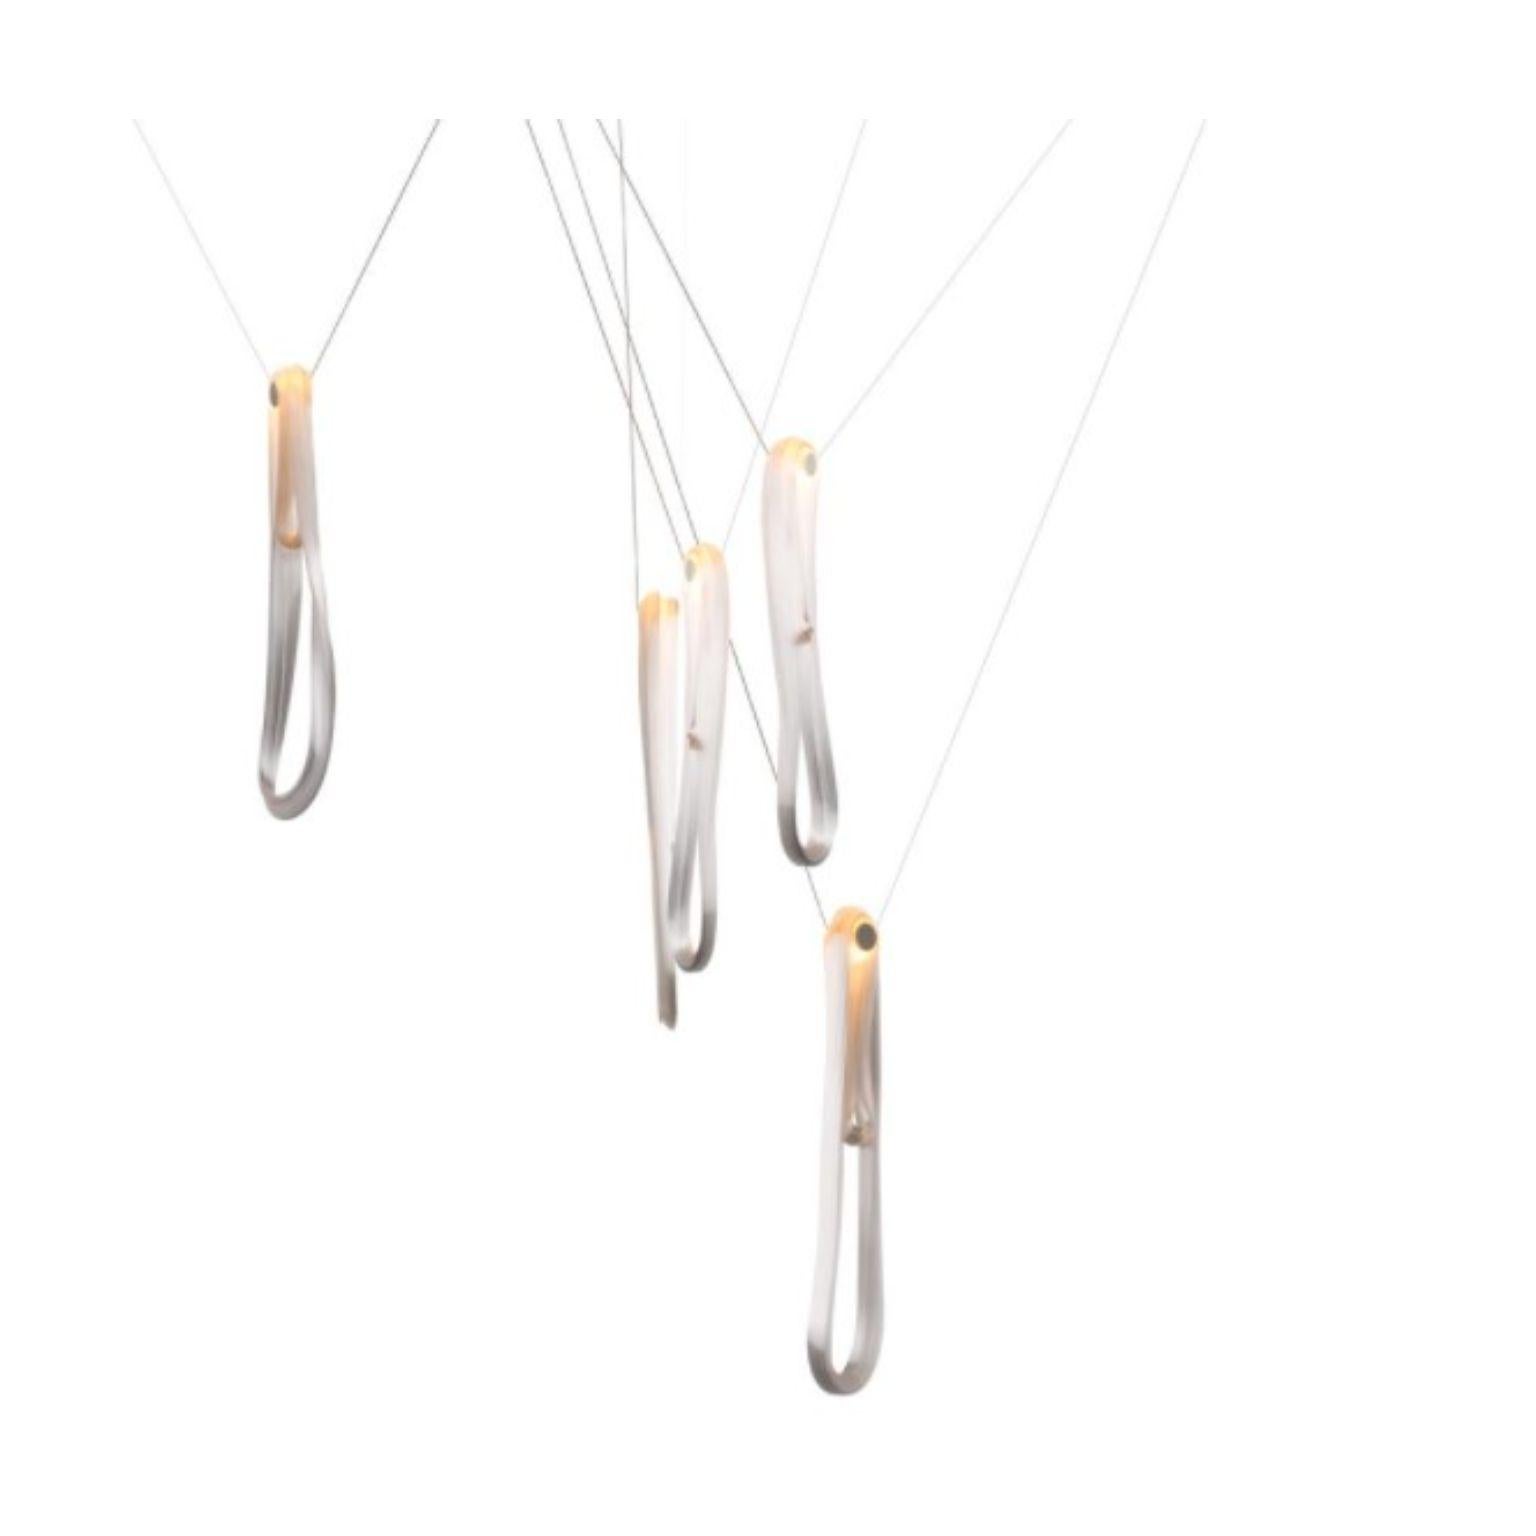 87.5 Pendant by Bocci
Dimensions: D 15.2 x H 300 cm
Materials: brushed nickel round canopy
Weight: 6.8 kg
Also Available in different dimensions.

All our lamps can be wired according to each country. If sold to the USA it will be wired for